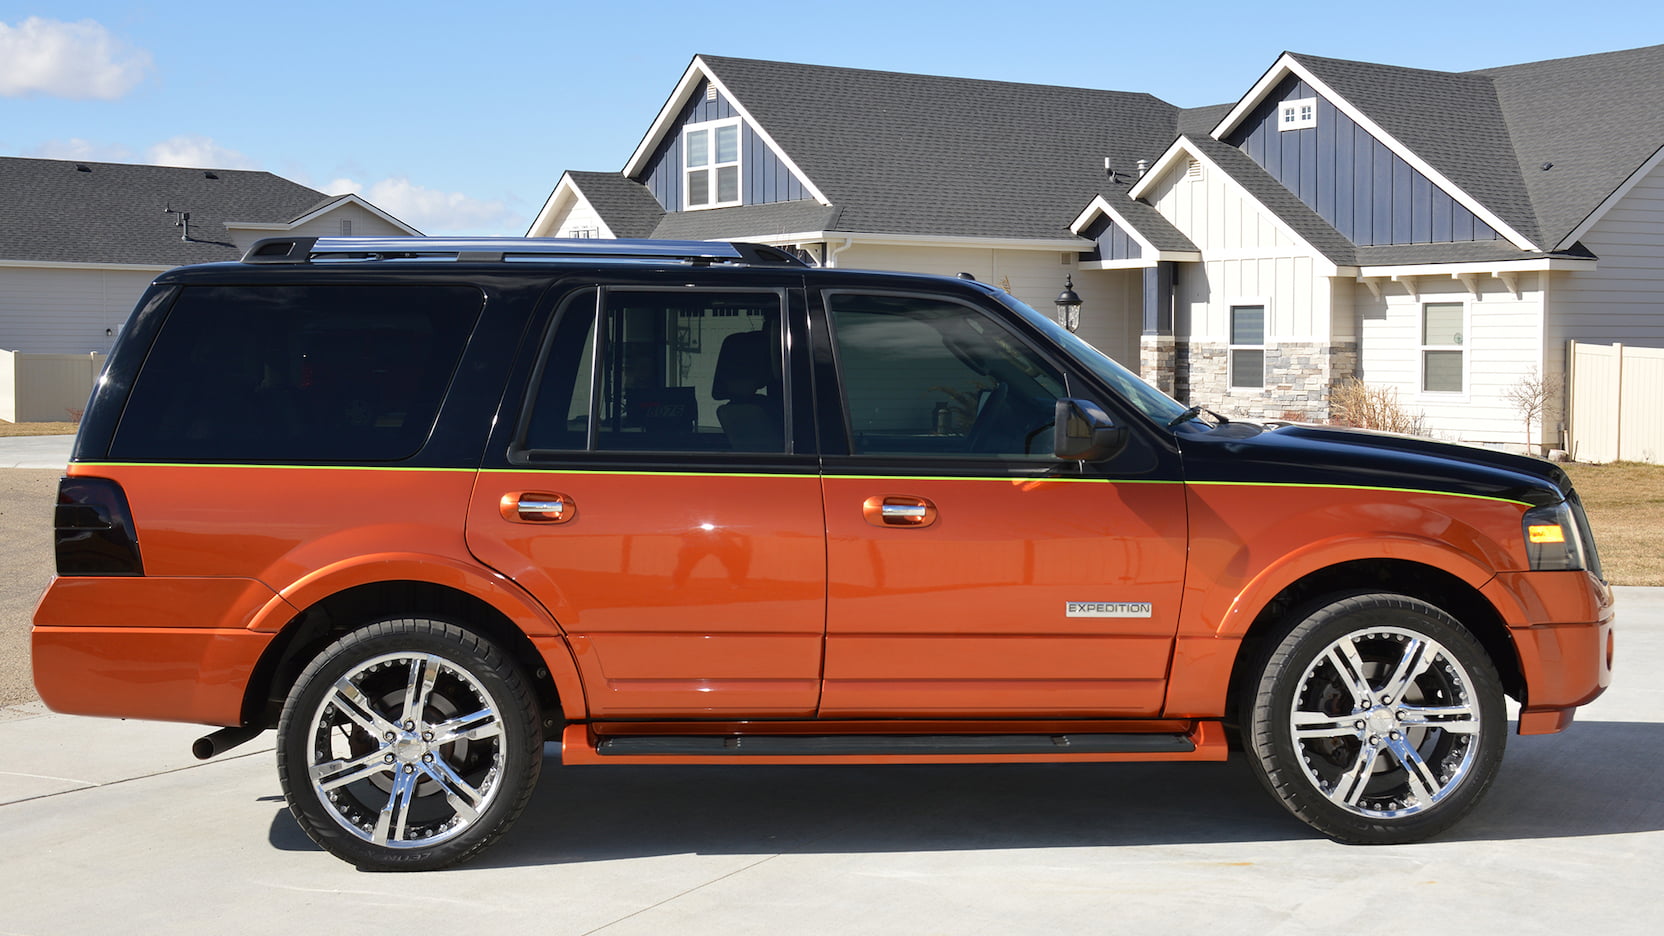 2007 Ford Expedition | T160 | Glendale 2021